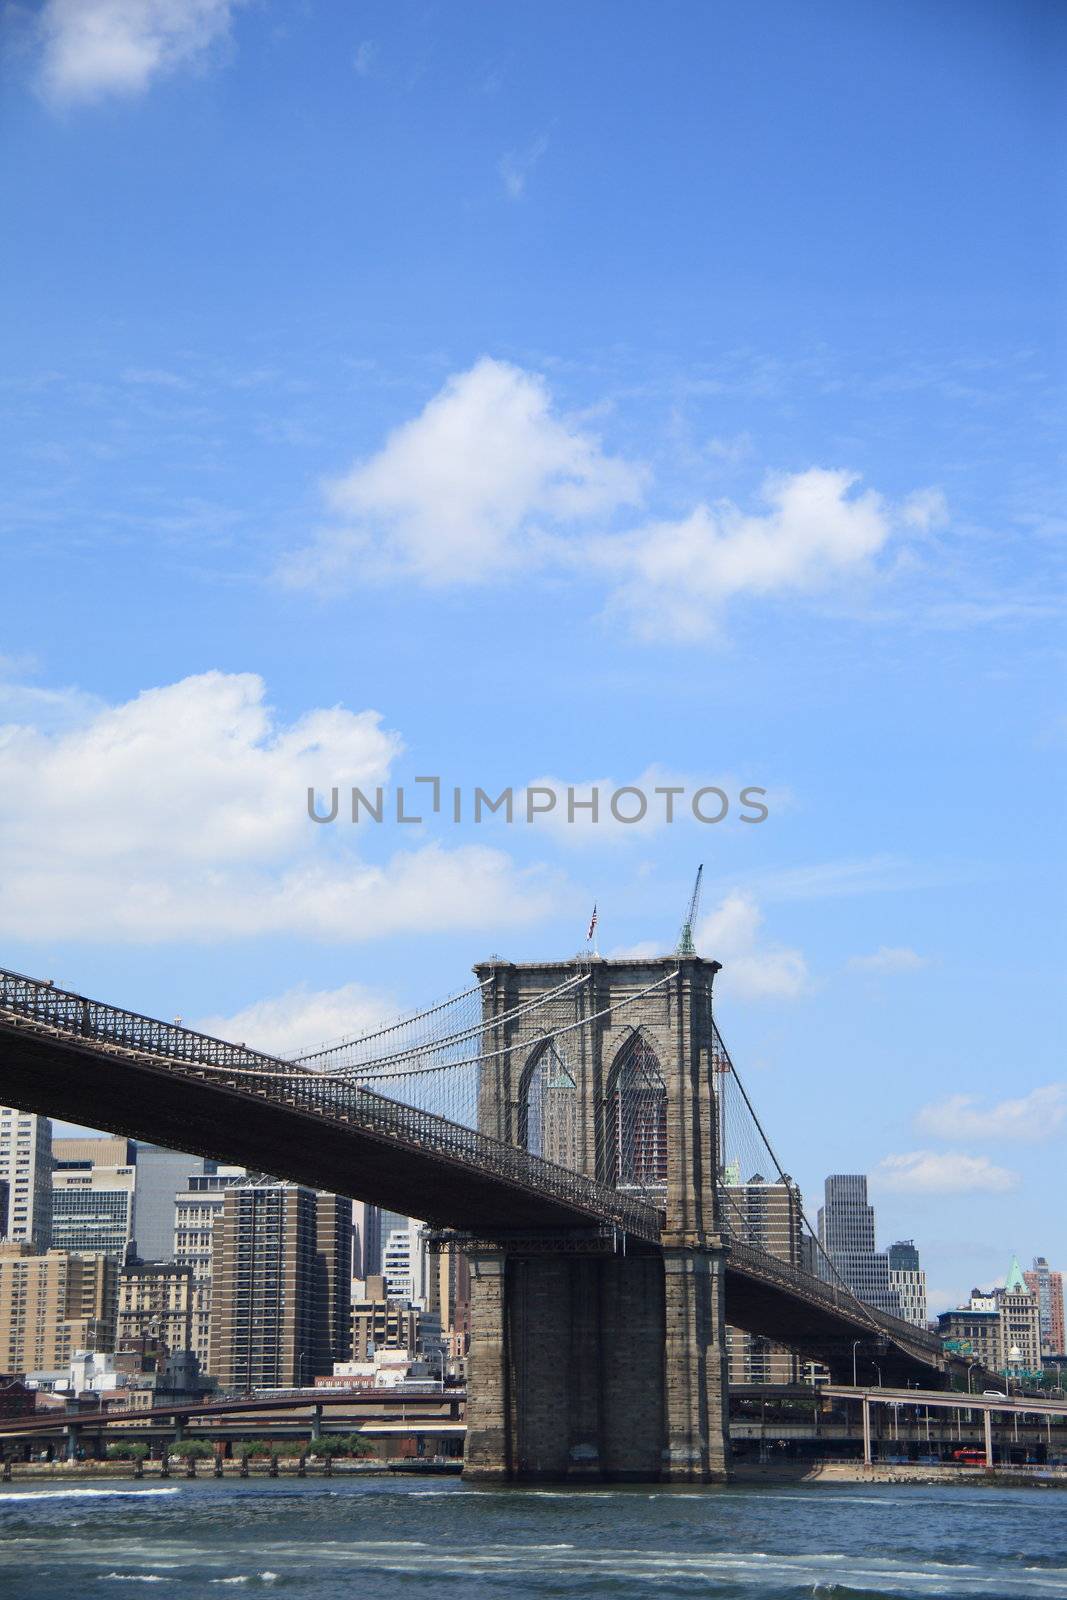 Brooklyn Bridge arches and steel cables across the East River to Manhattan